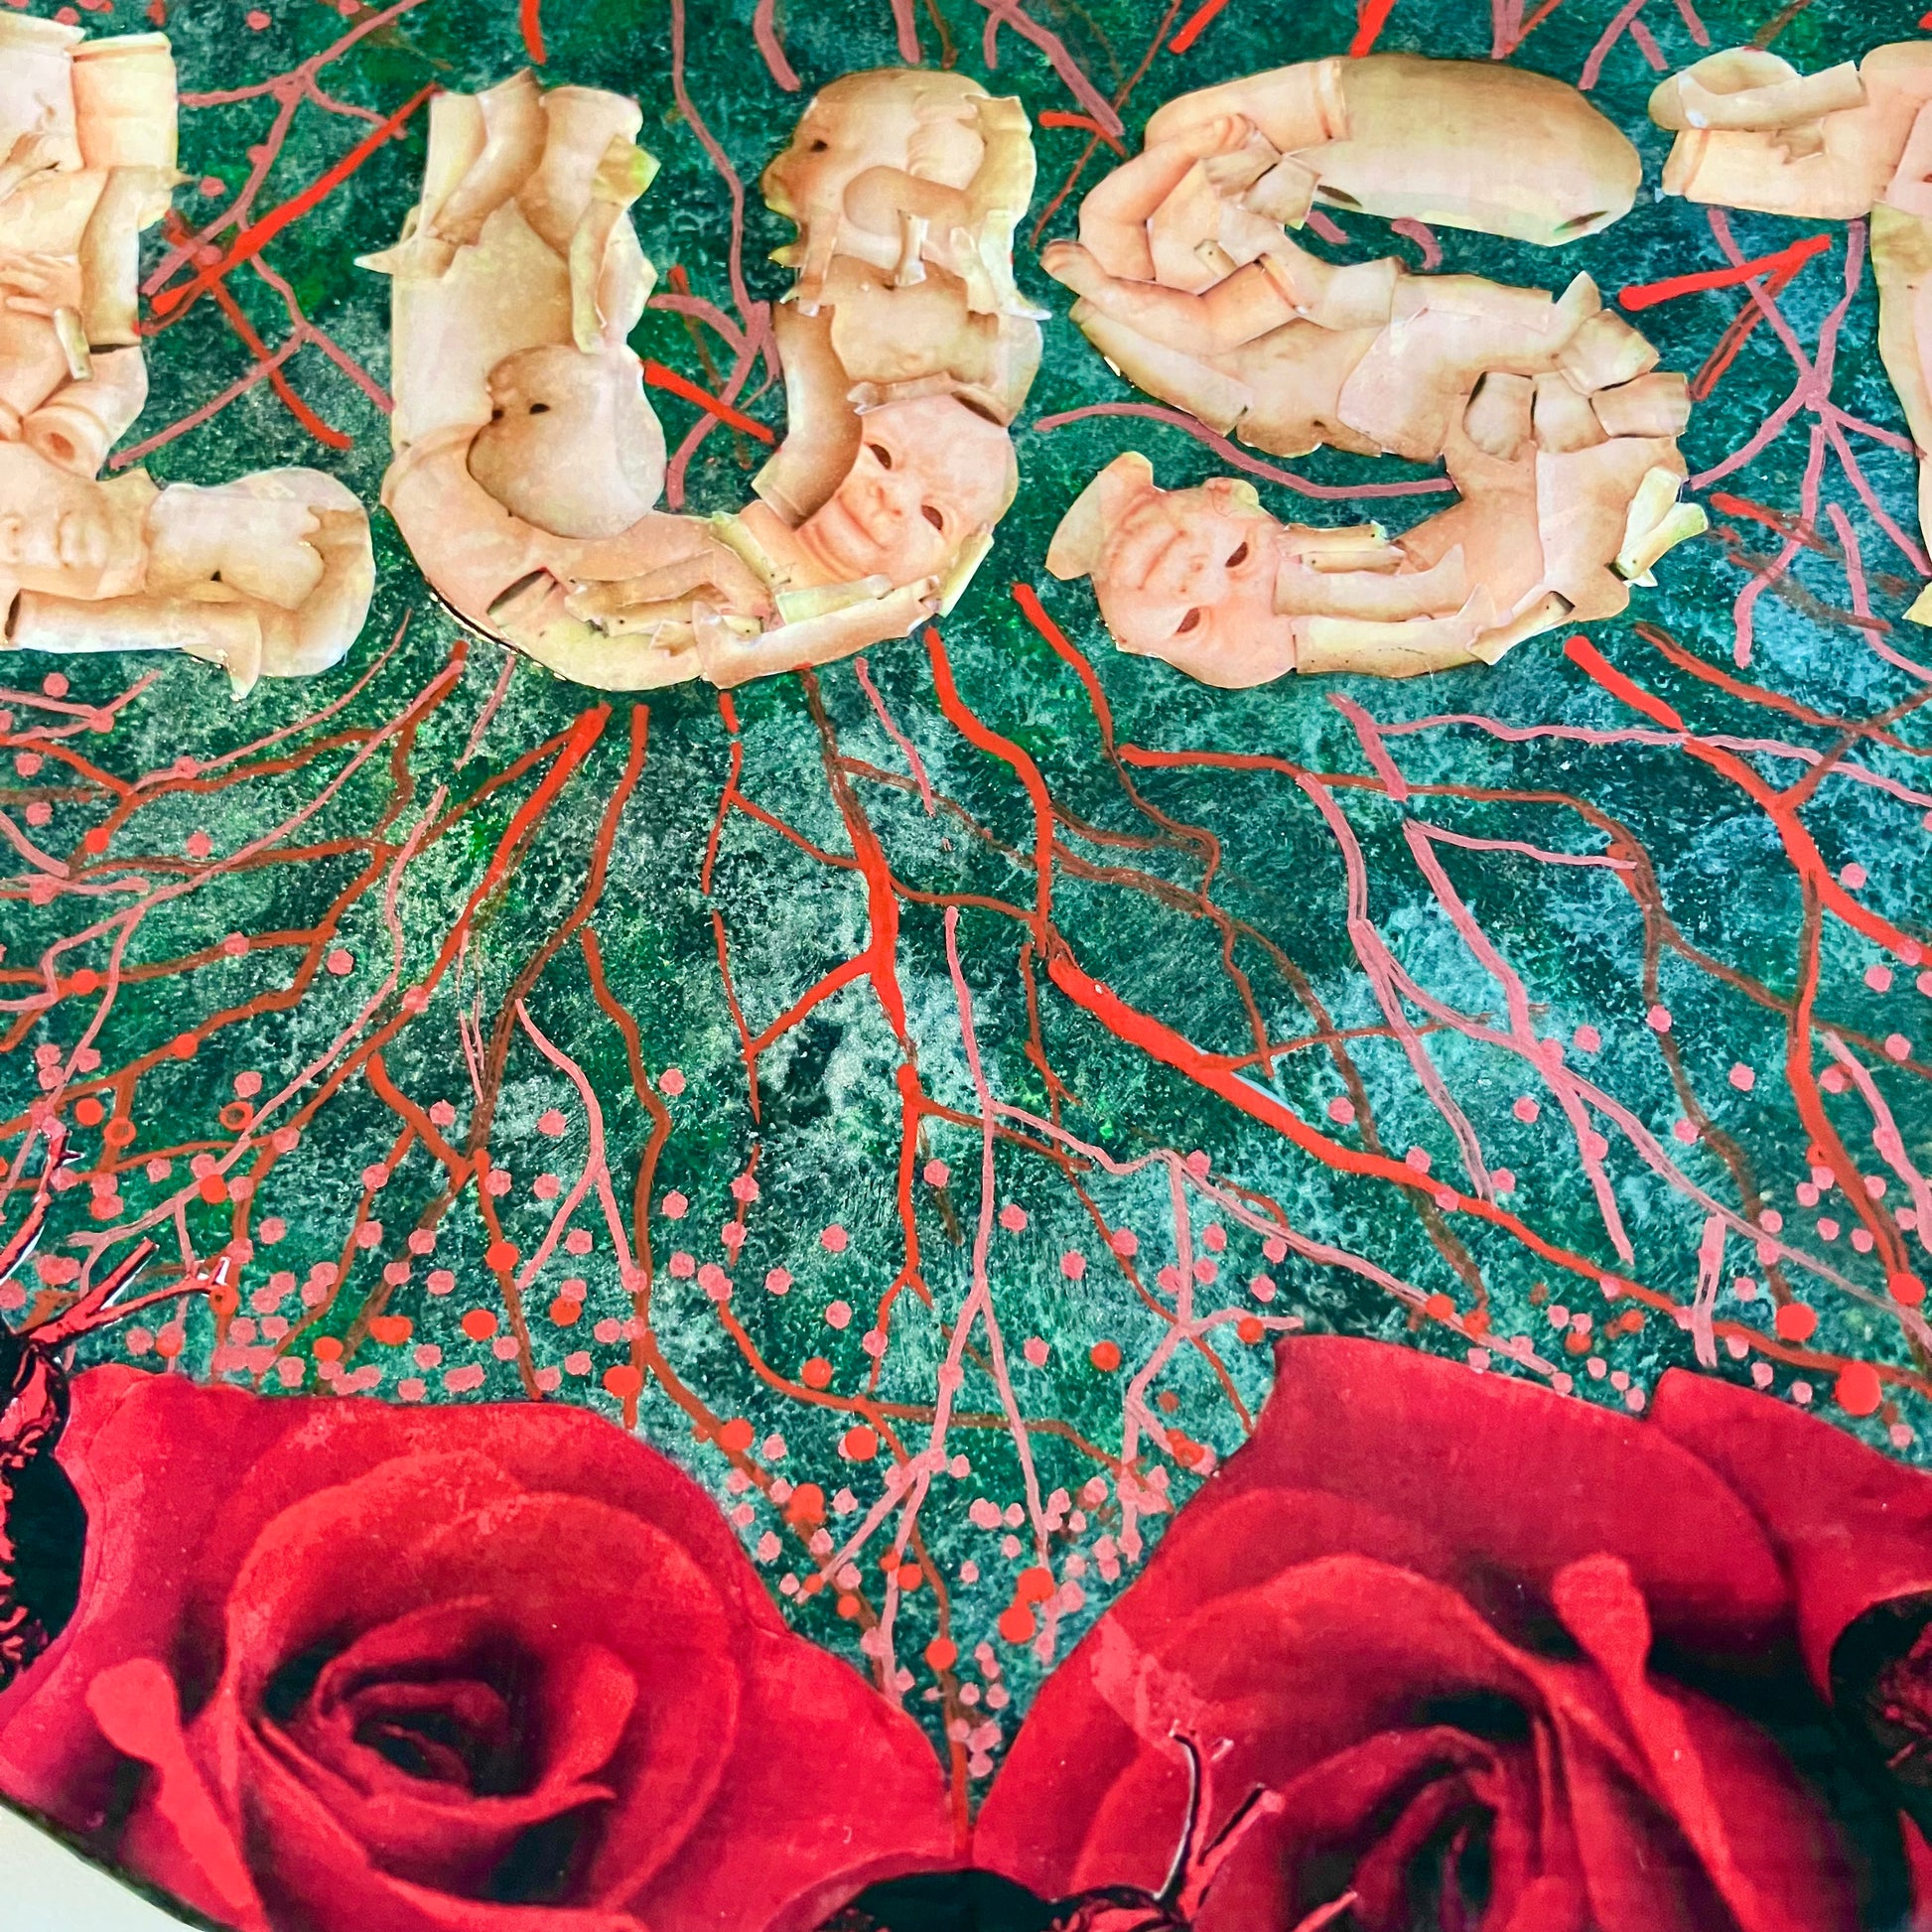 "Lust" Wall Plate by House of Frisson, featuring the word "lust" written with plastic doll parts, framed by red roses and anatomical human heart ,on a charcoal grey background with vein patterns. Closeup detail .